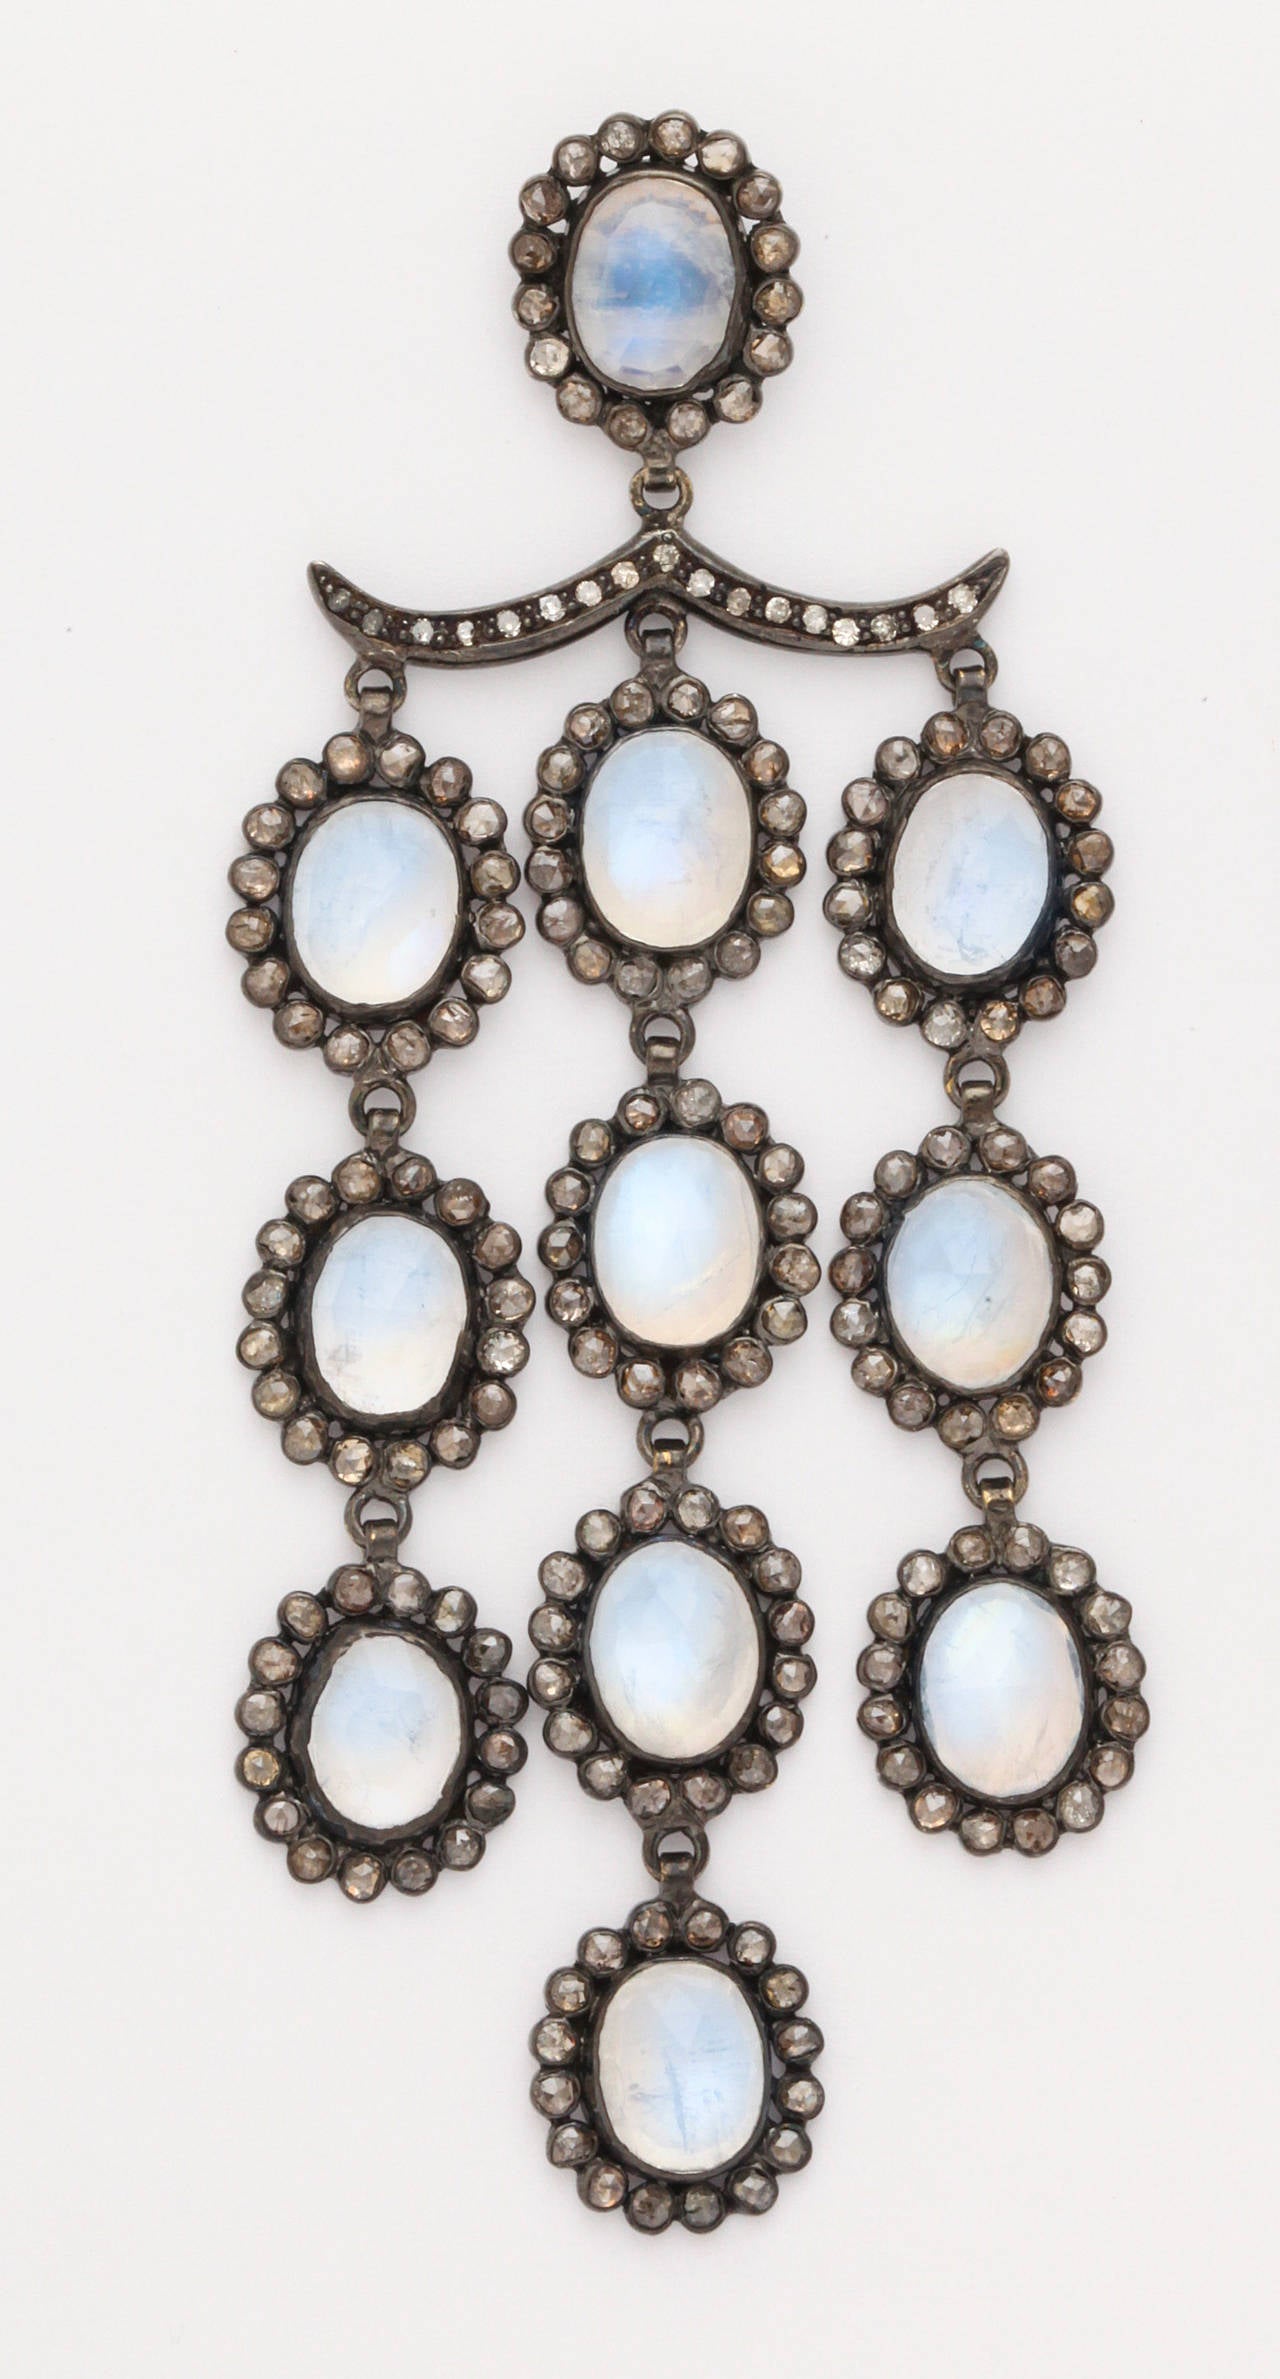 A pair of moonstone, rose cut diamond and rhodium plated sterling silver earrings.The earrings are composed of cascading moonstone and diamond pendants suspended from diamond set bars. The diamond bars are suspended from moonstone and diamond